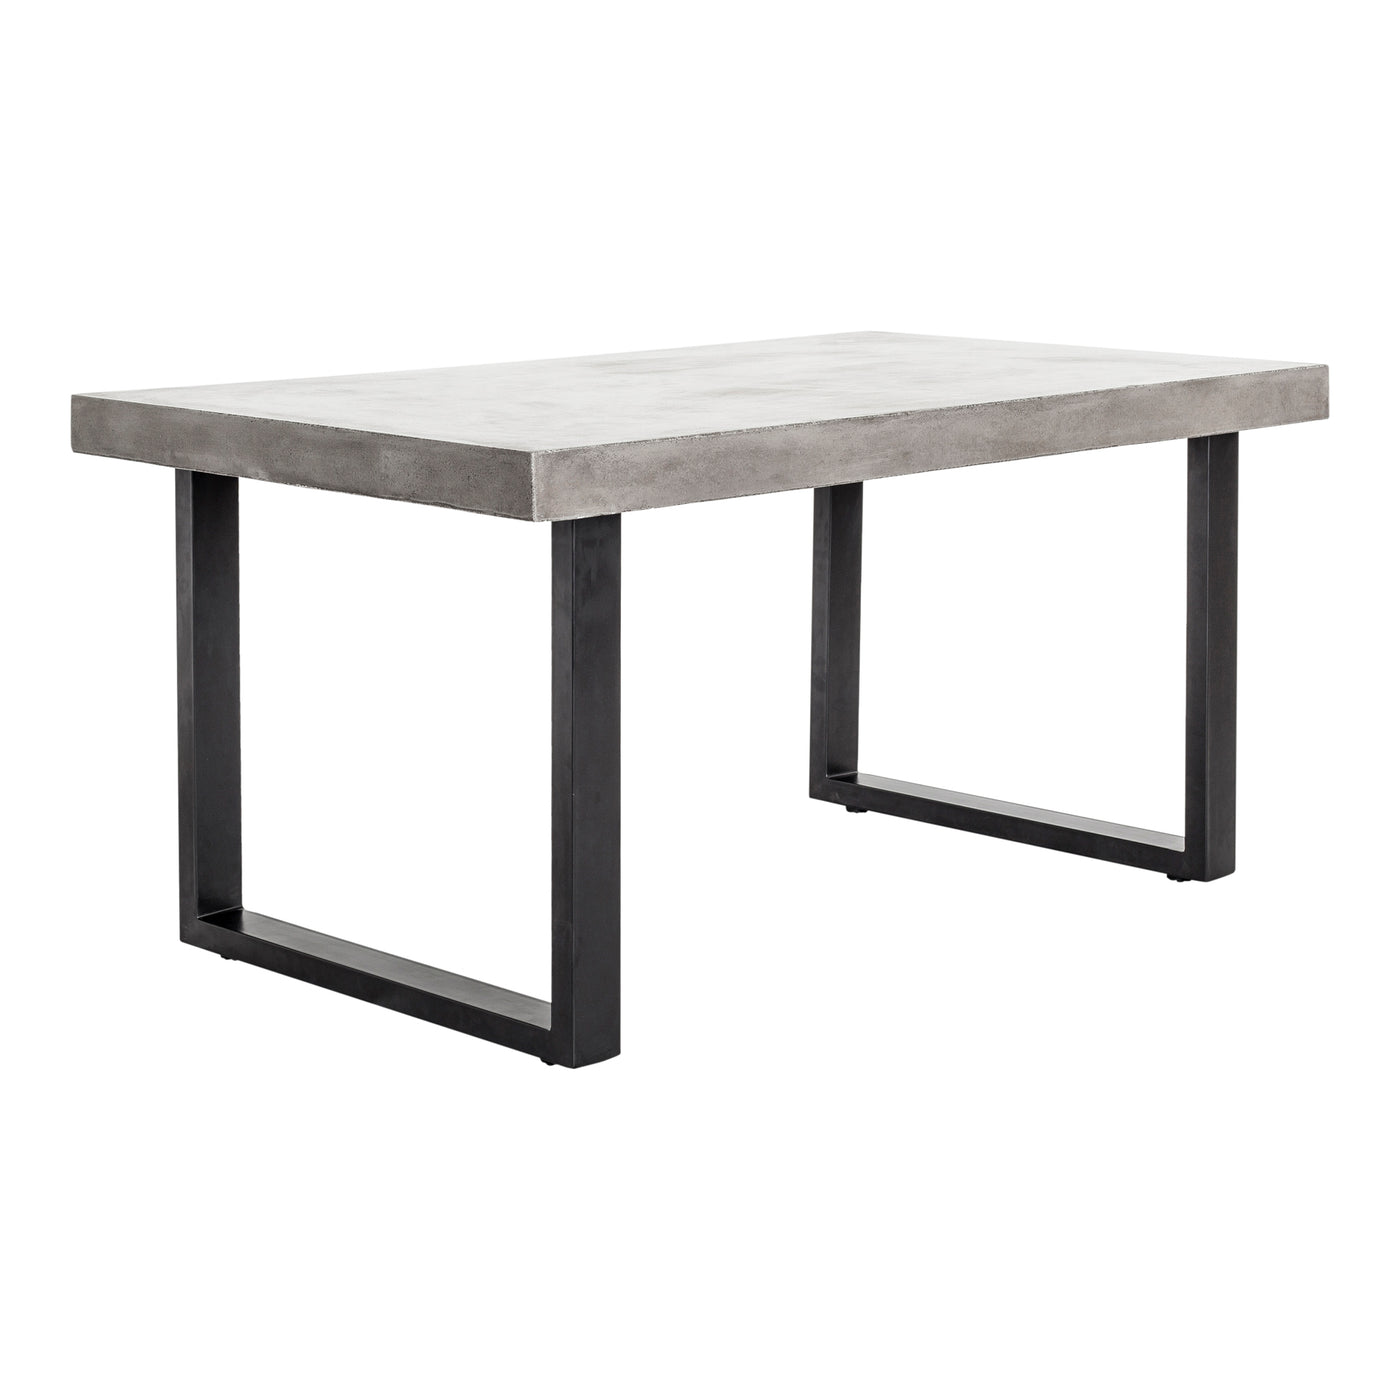 Perfect for indoors or out, the Jedrik is a cool cement and fiber table with black steel legs.
<h6>Dimensions</h6>
H= 30.2...